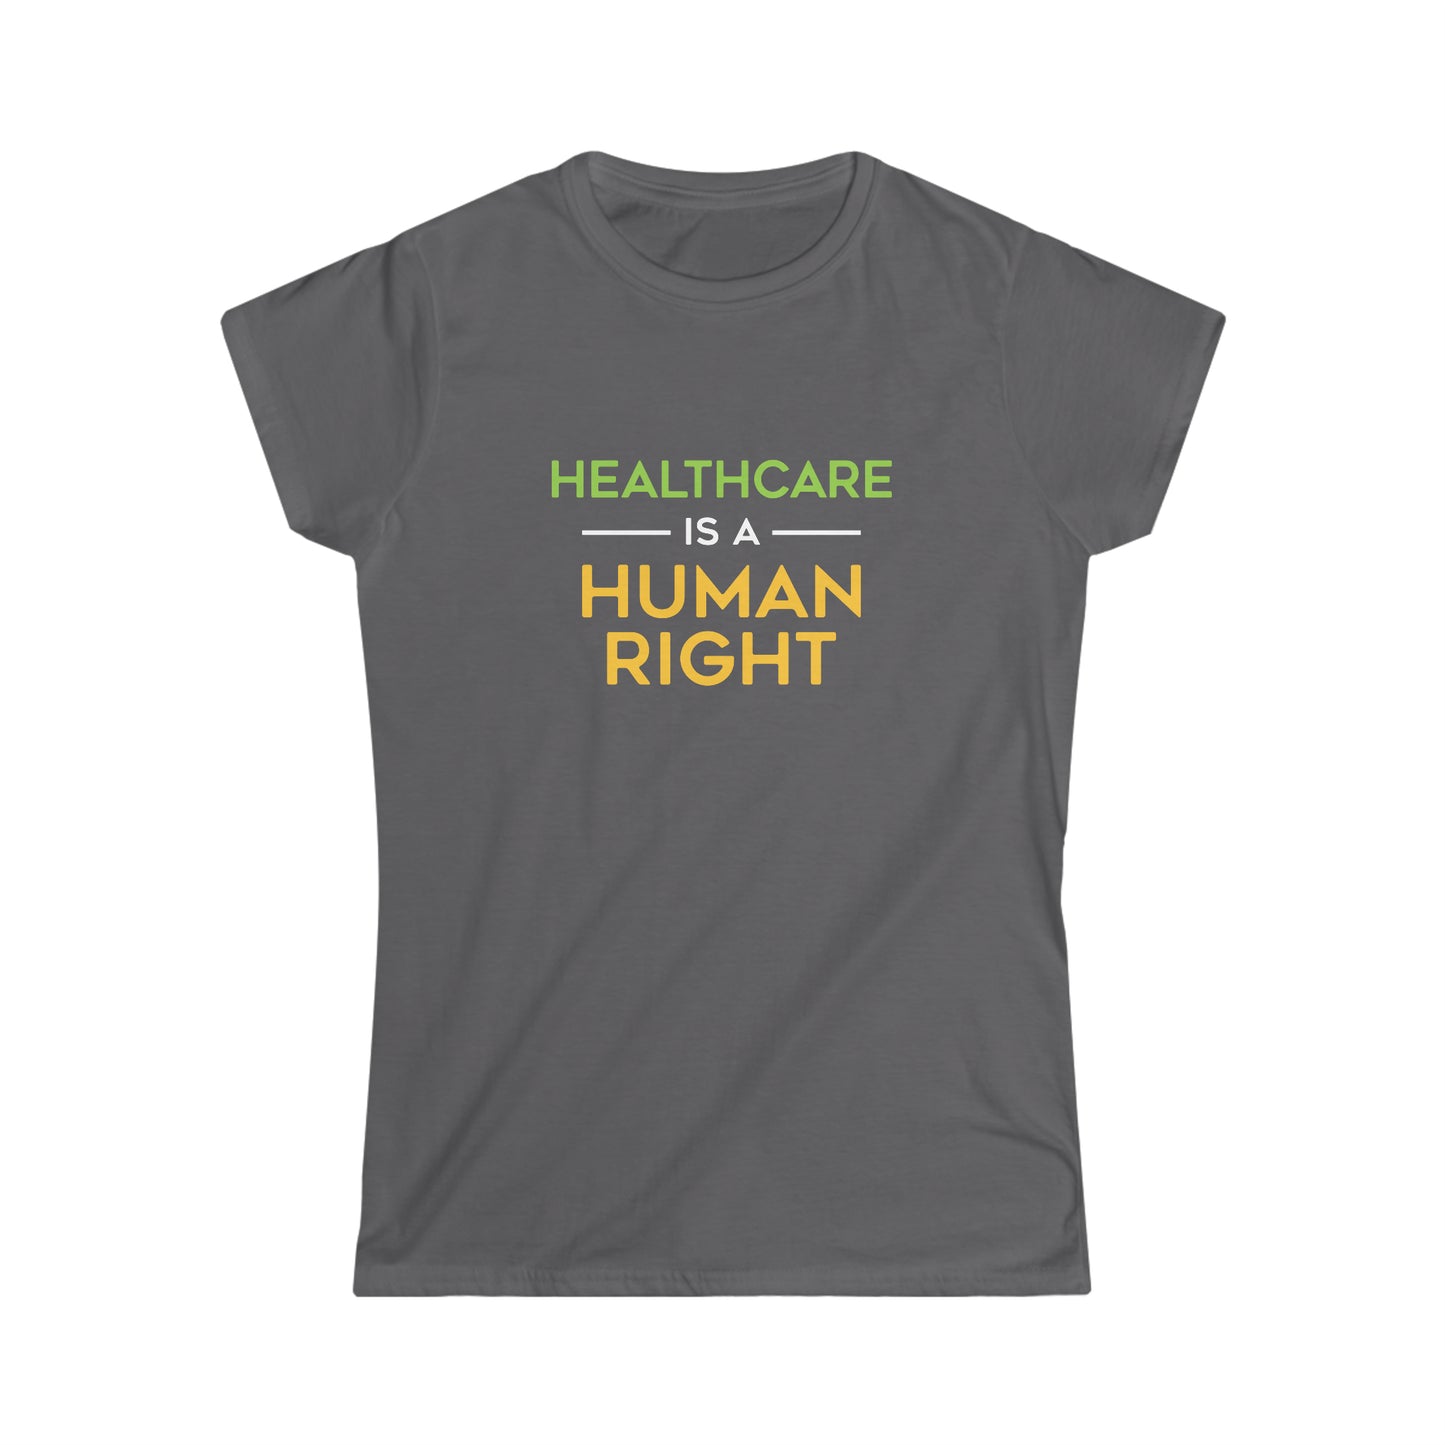 “Healthcare Is A Human Right” Women’s T-Shirts